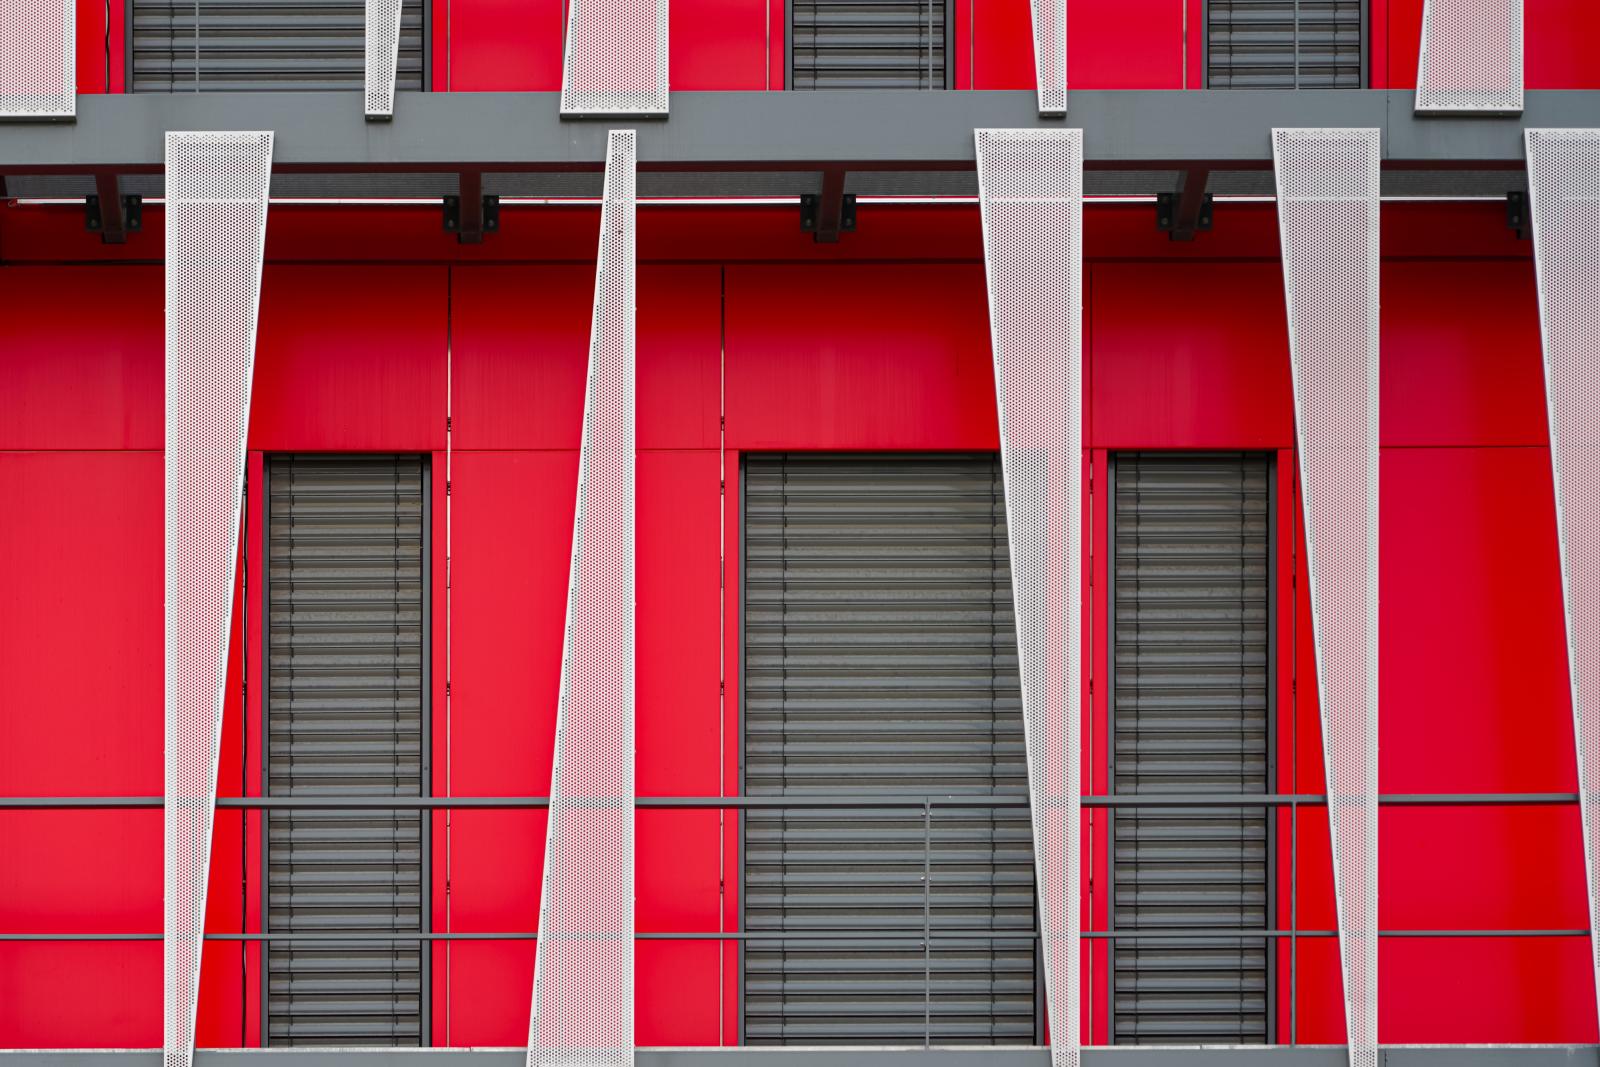 Image from New Photographs -  Grenoble, France  # 4295 4/2024 Geometric Vibrance:...